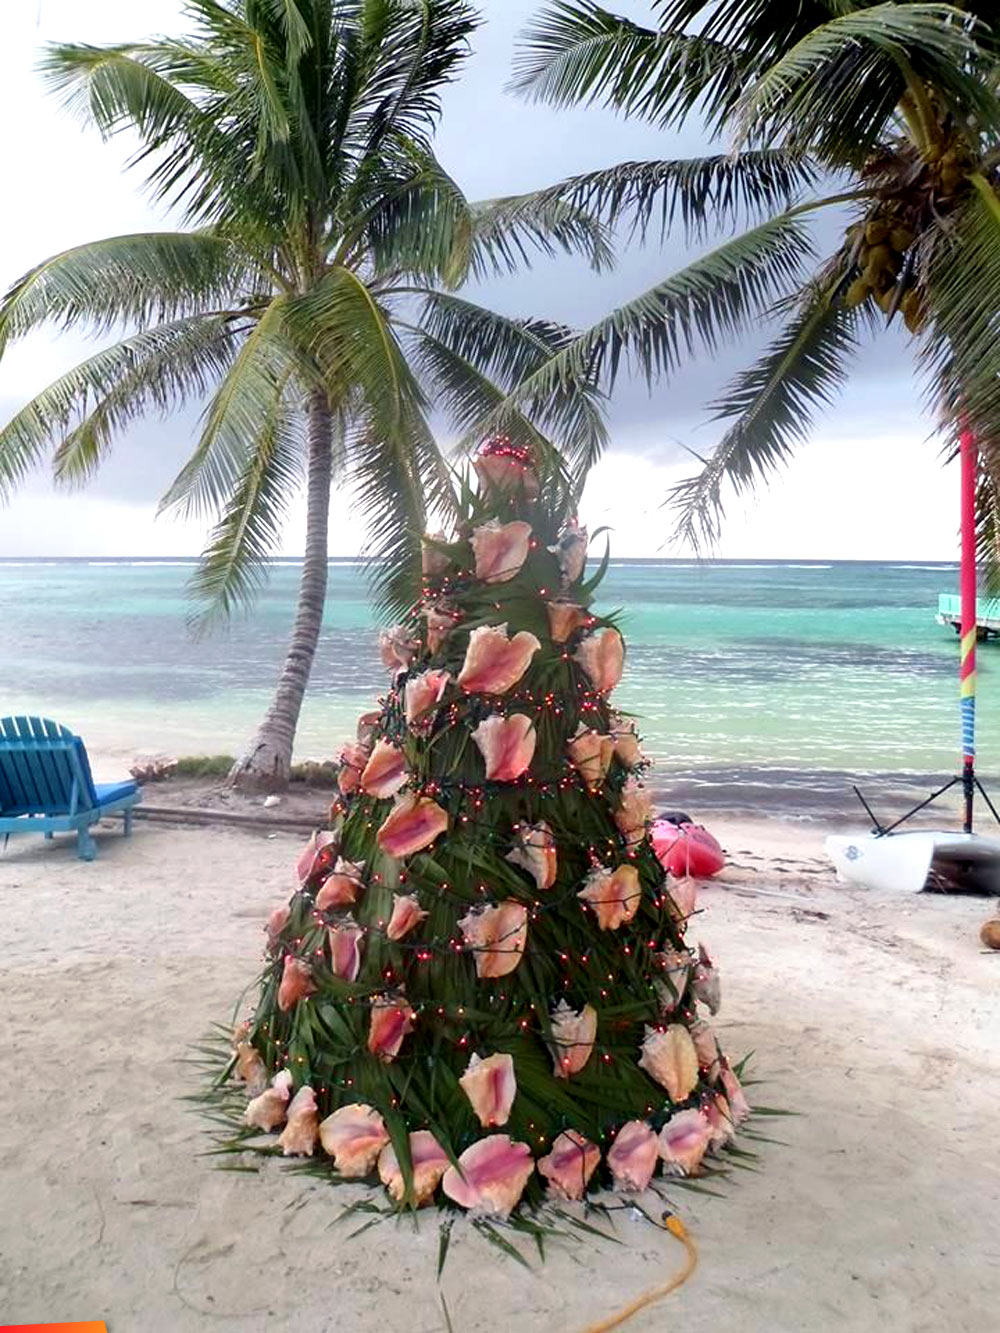 Christmas tree with conch shells for decoration, at Tranquility Bay